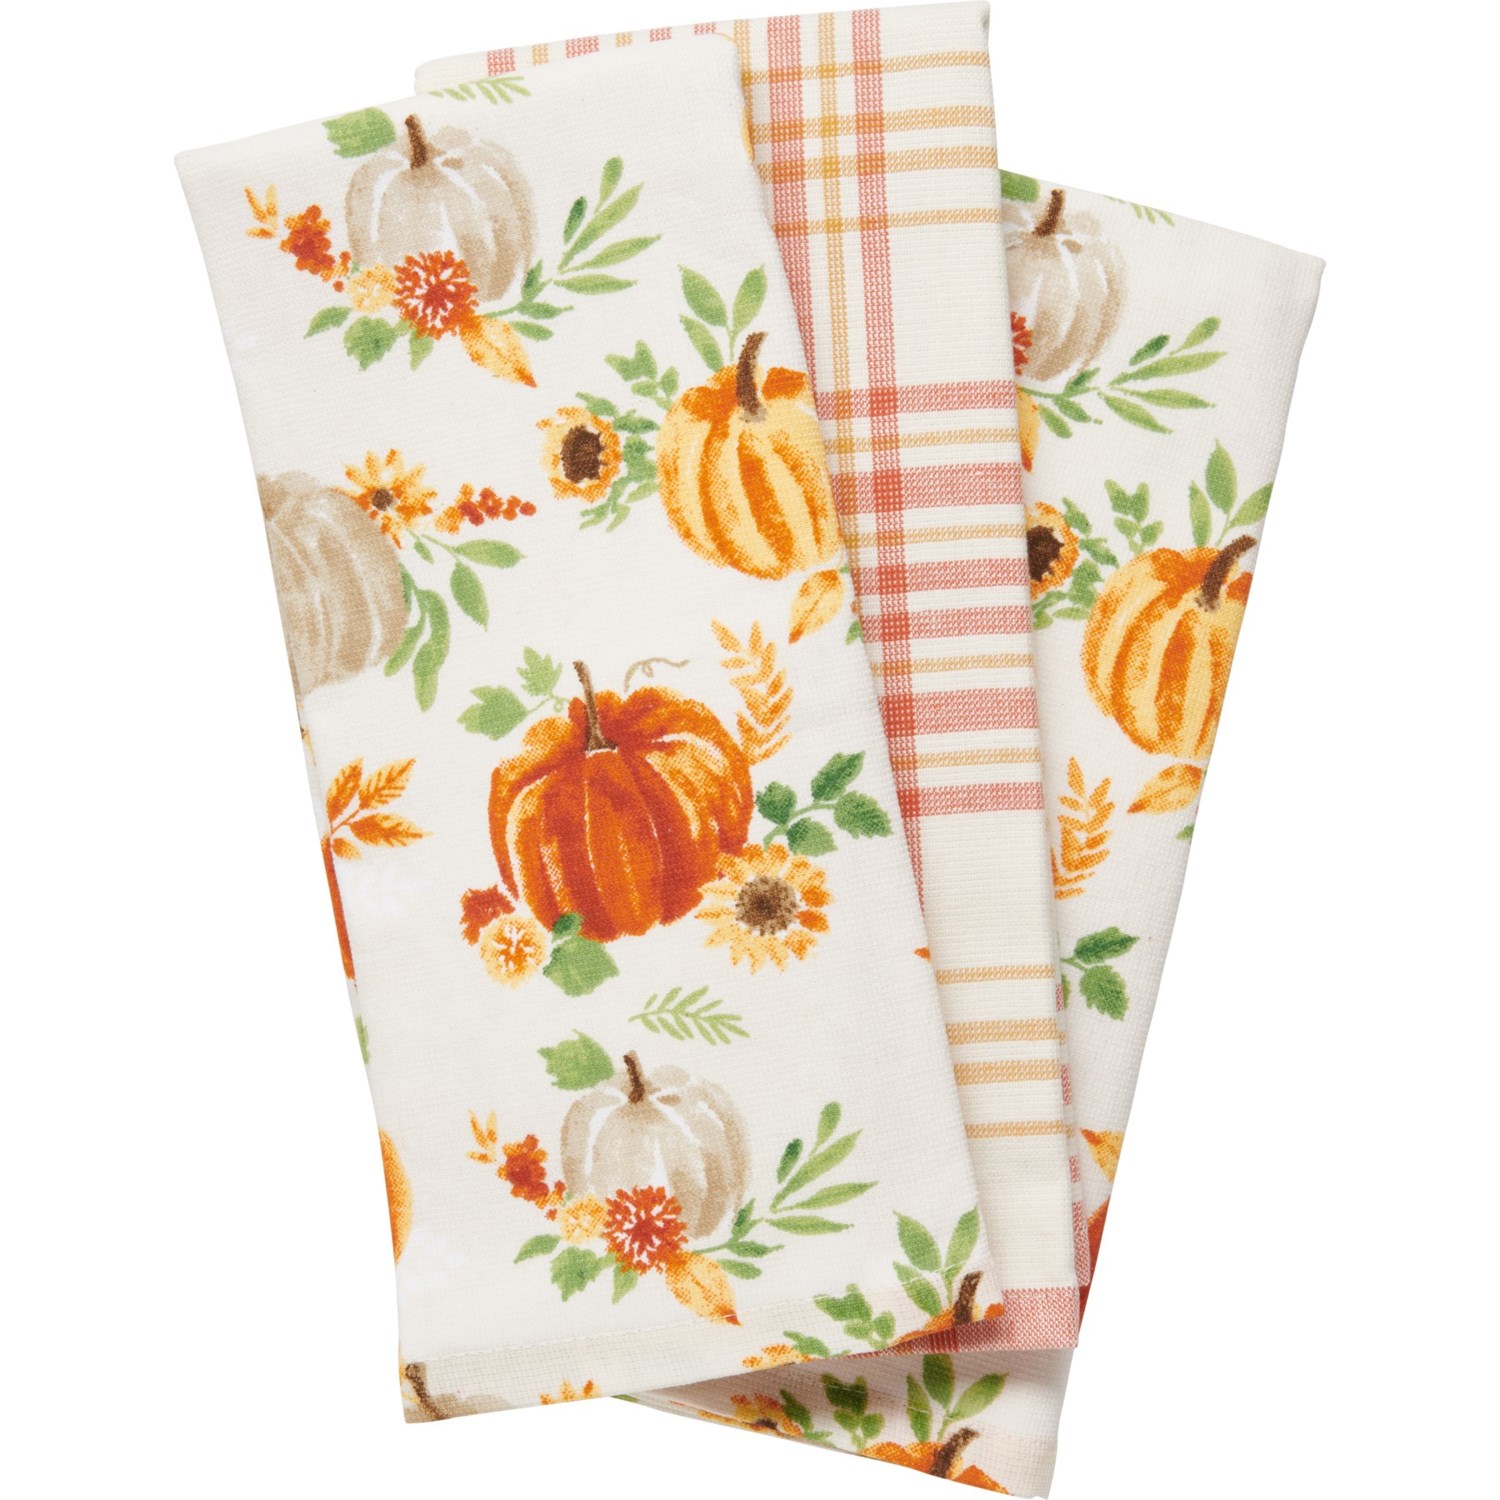 Cynthia Rowley Harvest Flow Kitchen Towels - 3-Pack - Save 44%